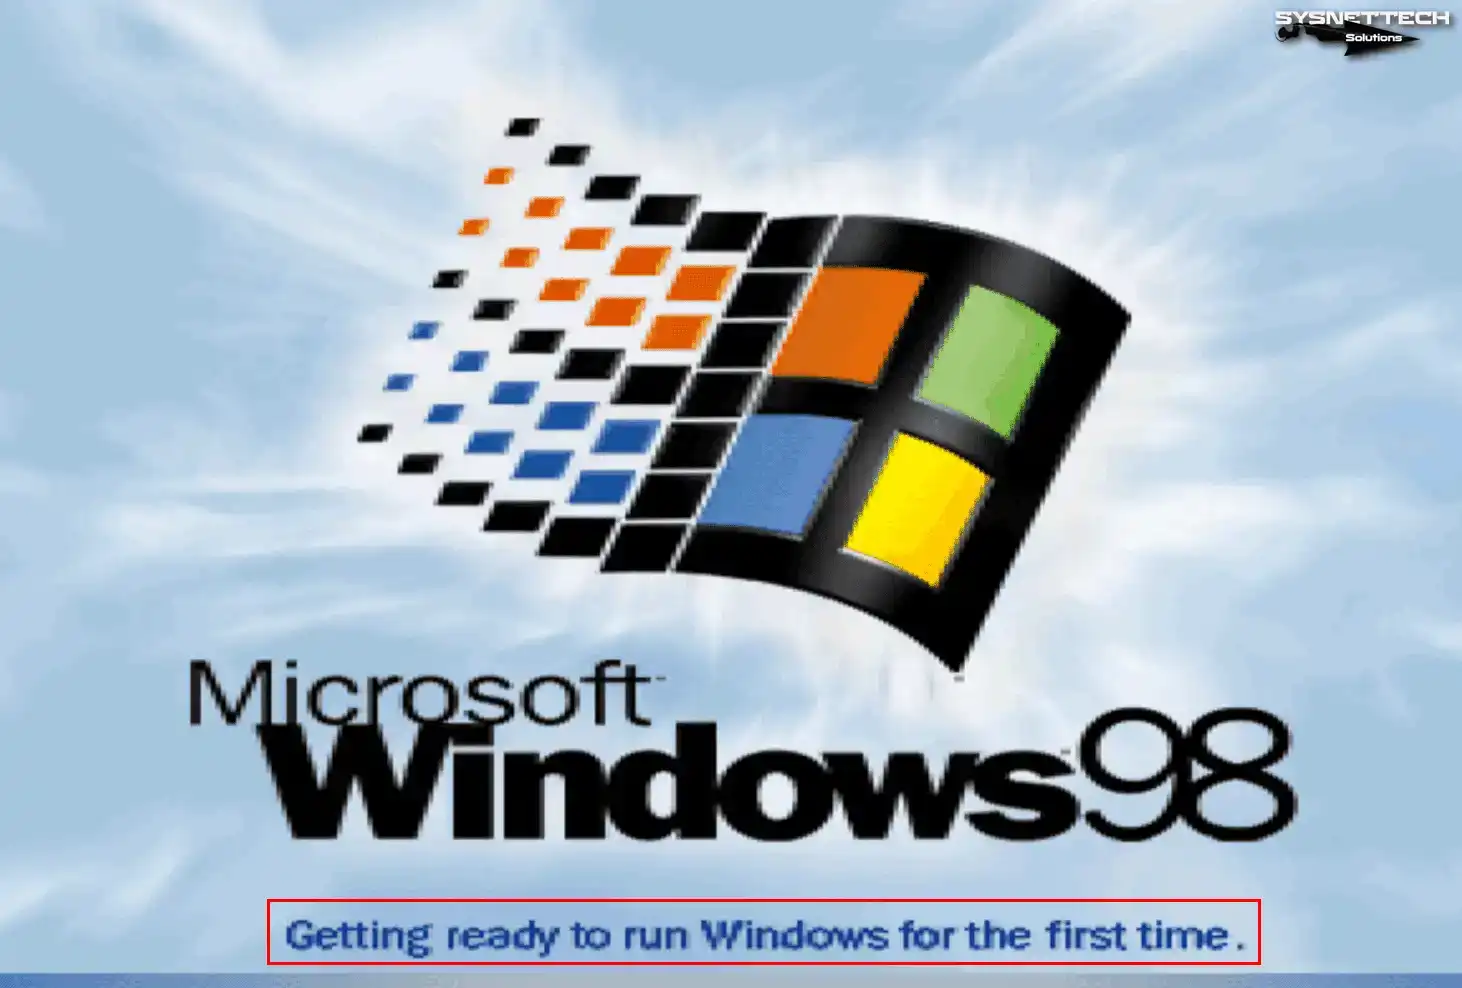 How to Install Windows 98 on VMware Workstation 17